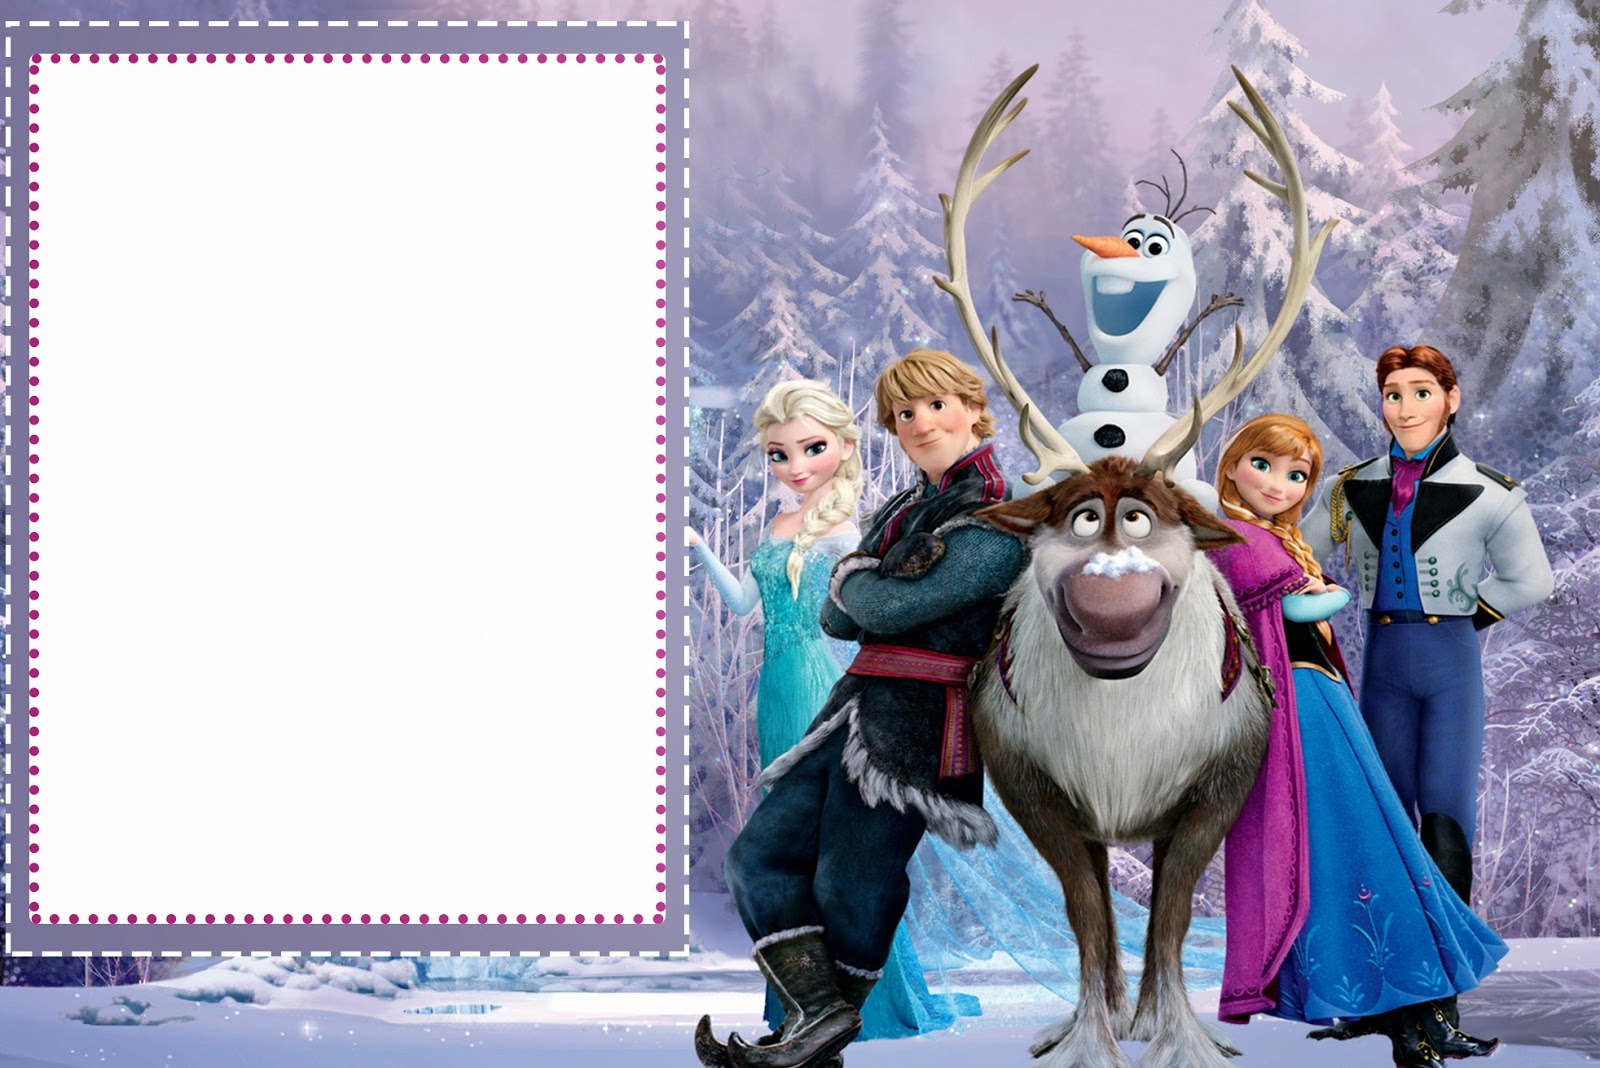 Frozen: Free Printable Cards Or Party Invitations. - Oh My Fiesta - Free Printable Frozen Birthday Cards